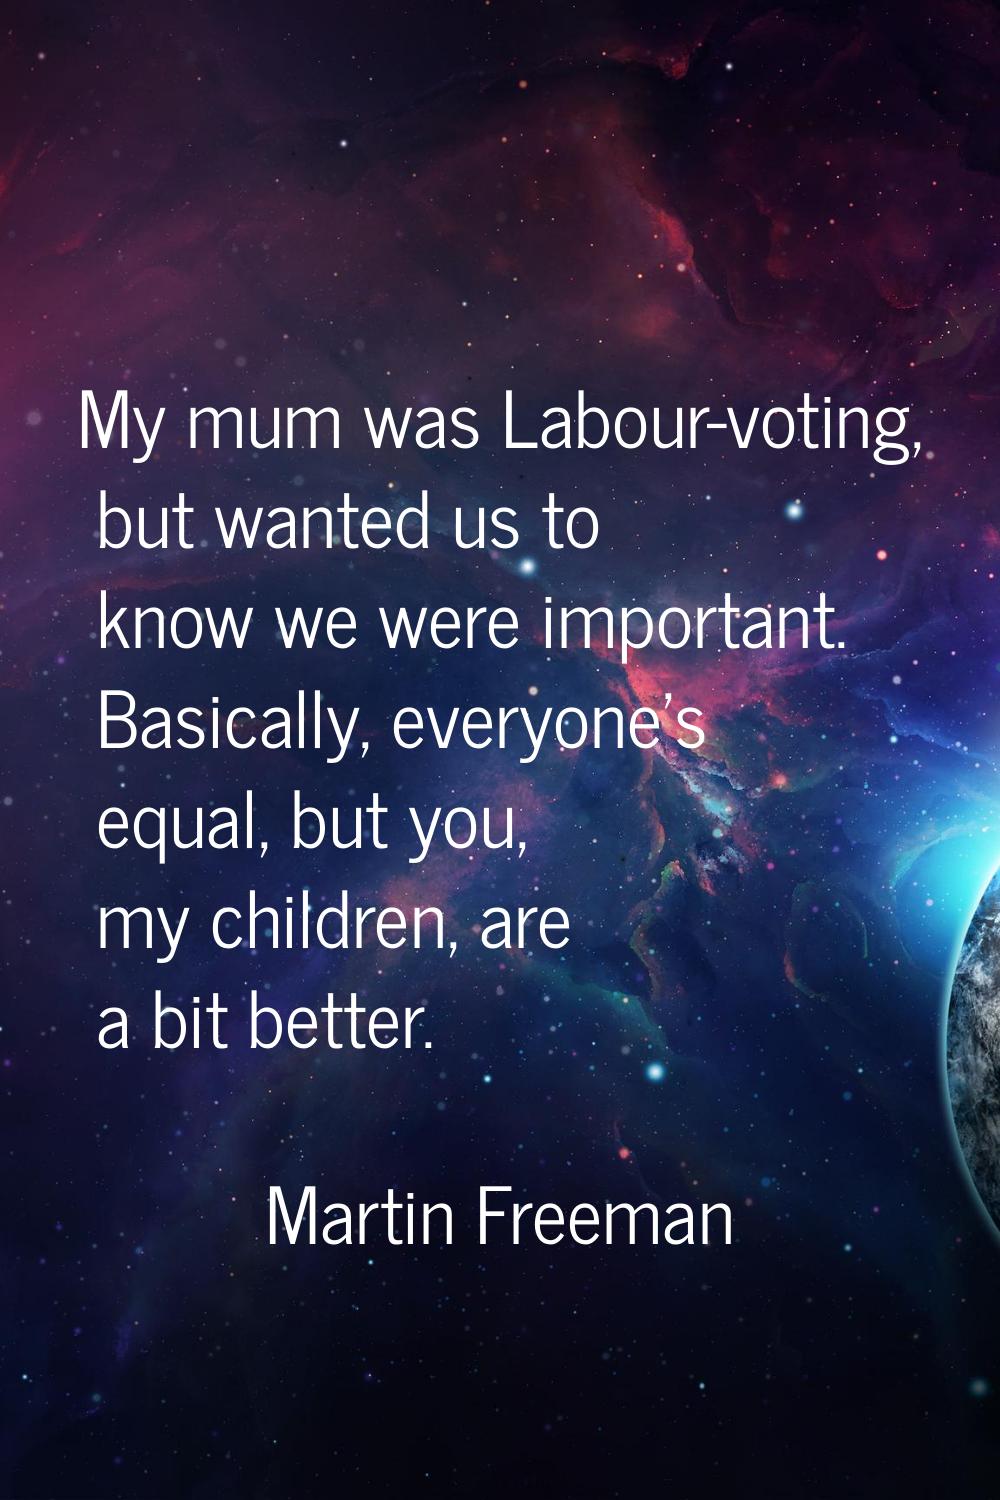 My mum was Labour-voting, but wanted us to know we were important. Basically, everyone's equal, but